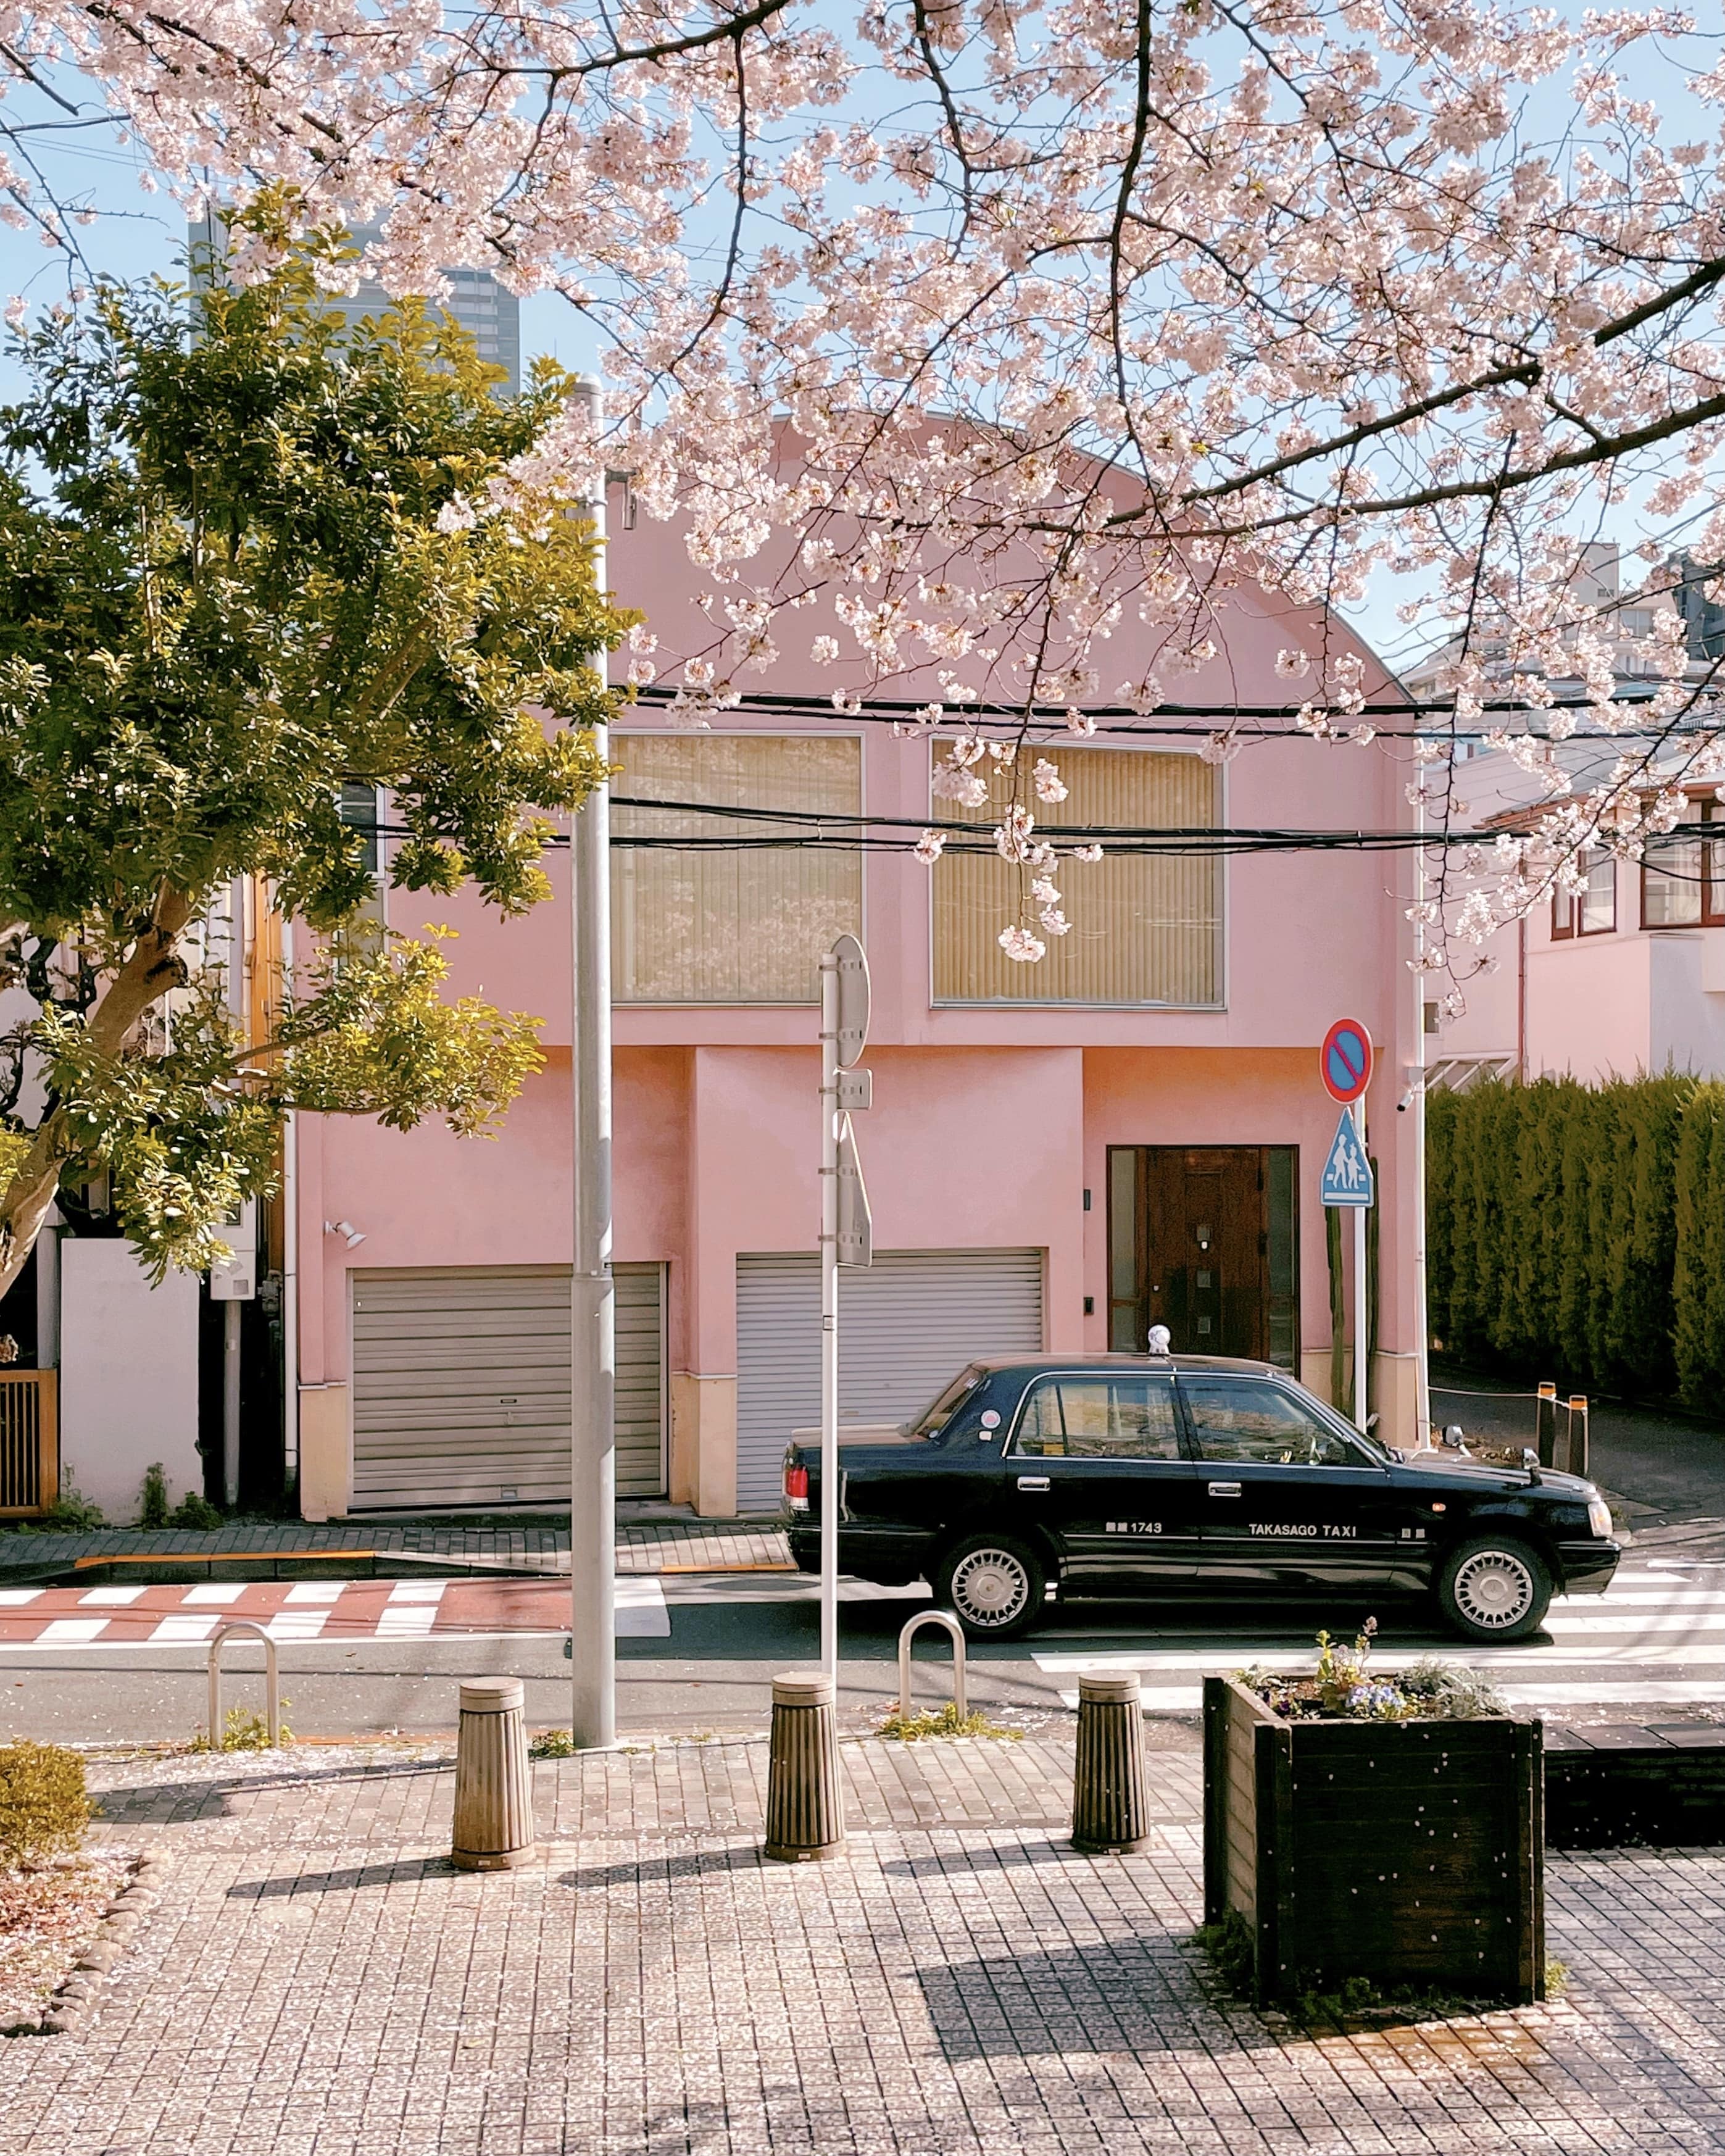 black car parked in street surrounded by cherry blossoms